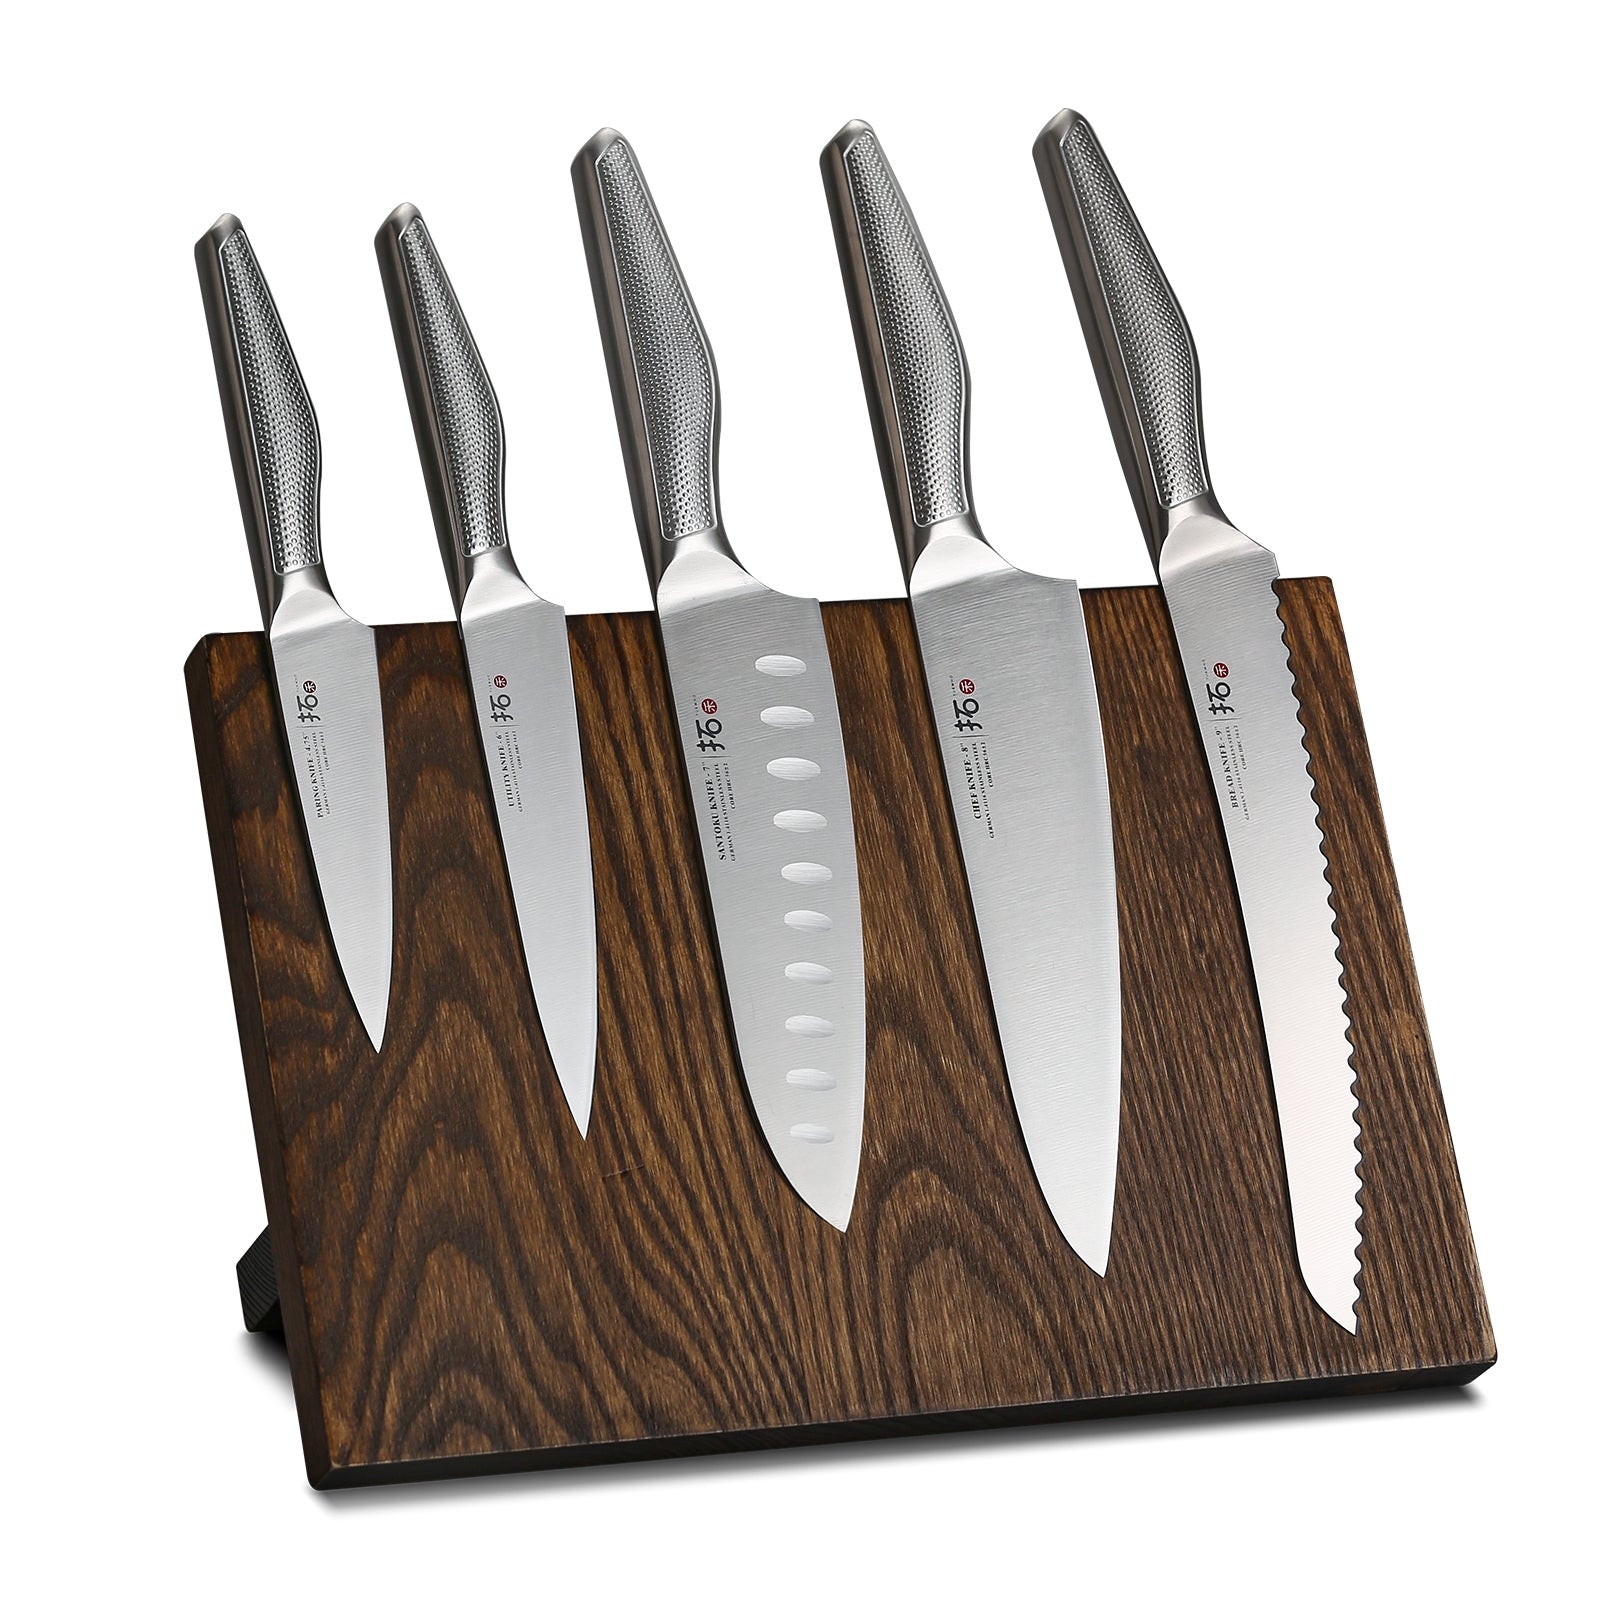 PICKWILL Chef Knife Sets, 8 Chef Knife and 3.5 Paring Knife Set  Professional Kitchen Knife Sets 2 Pieces, German High Carbon Stainless  Steel Boxed